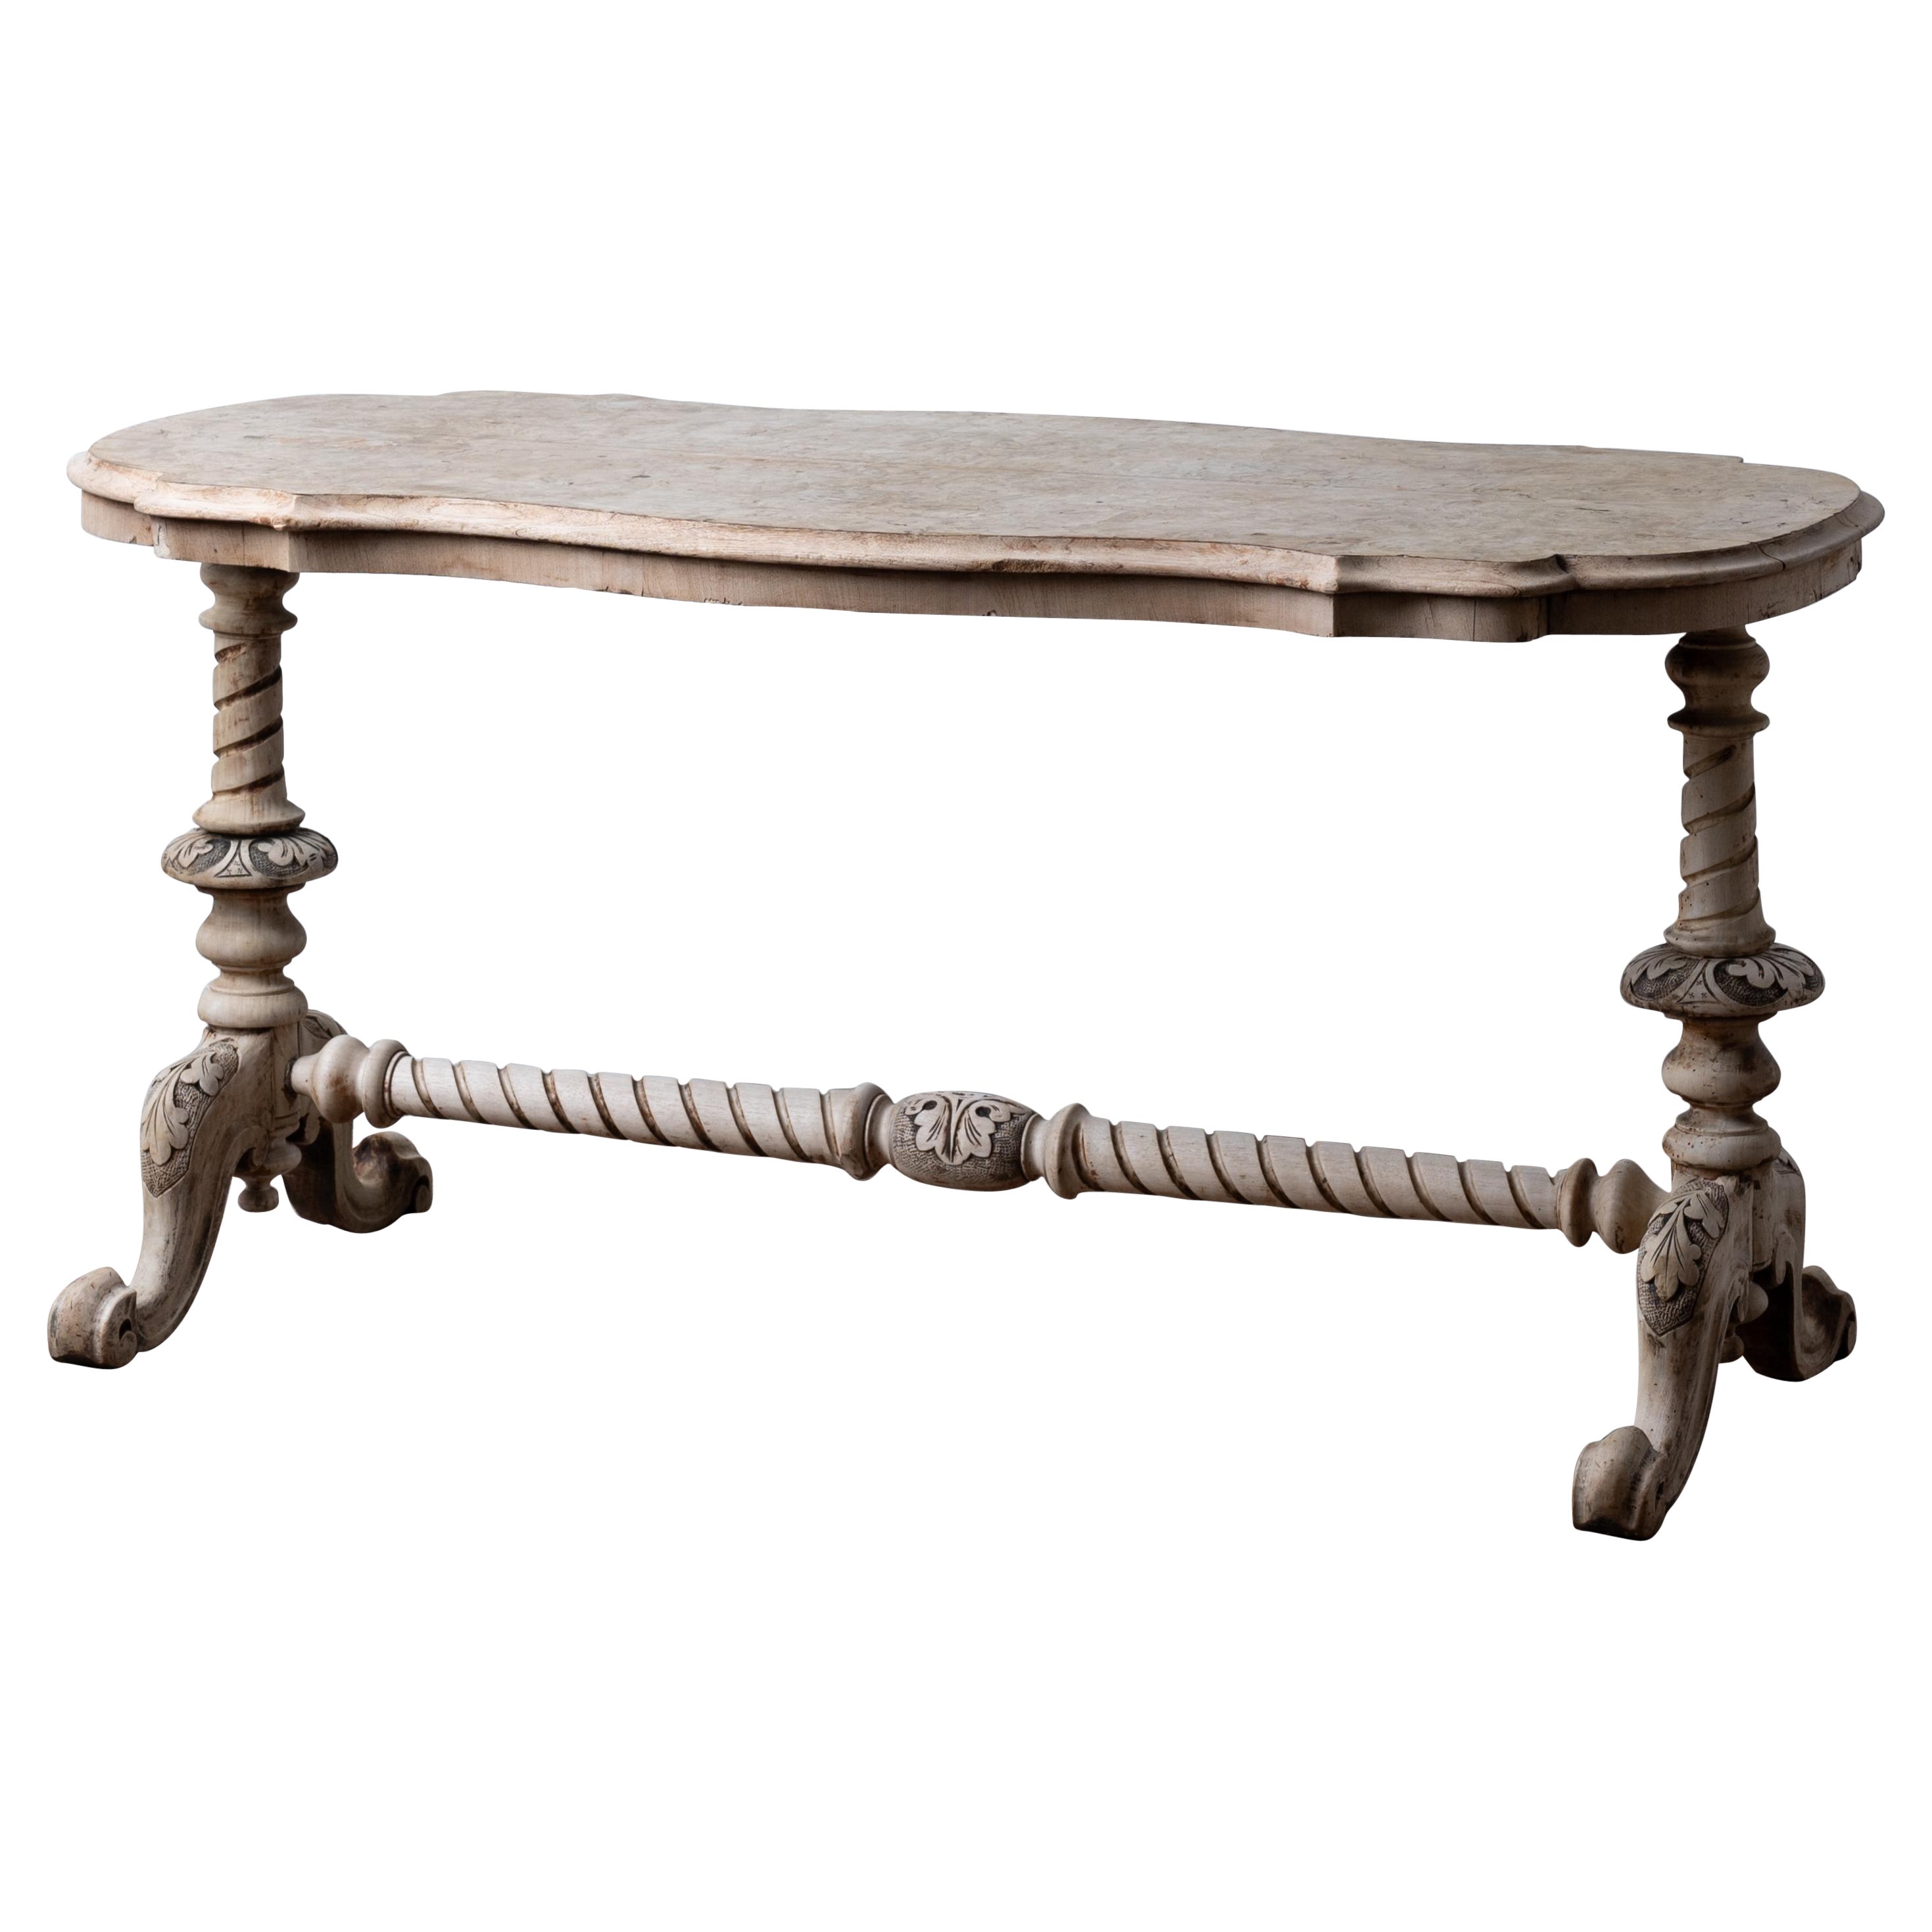 Bleached Victorian Burl Walnut Console Table, c.1870 For Sale